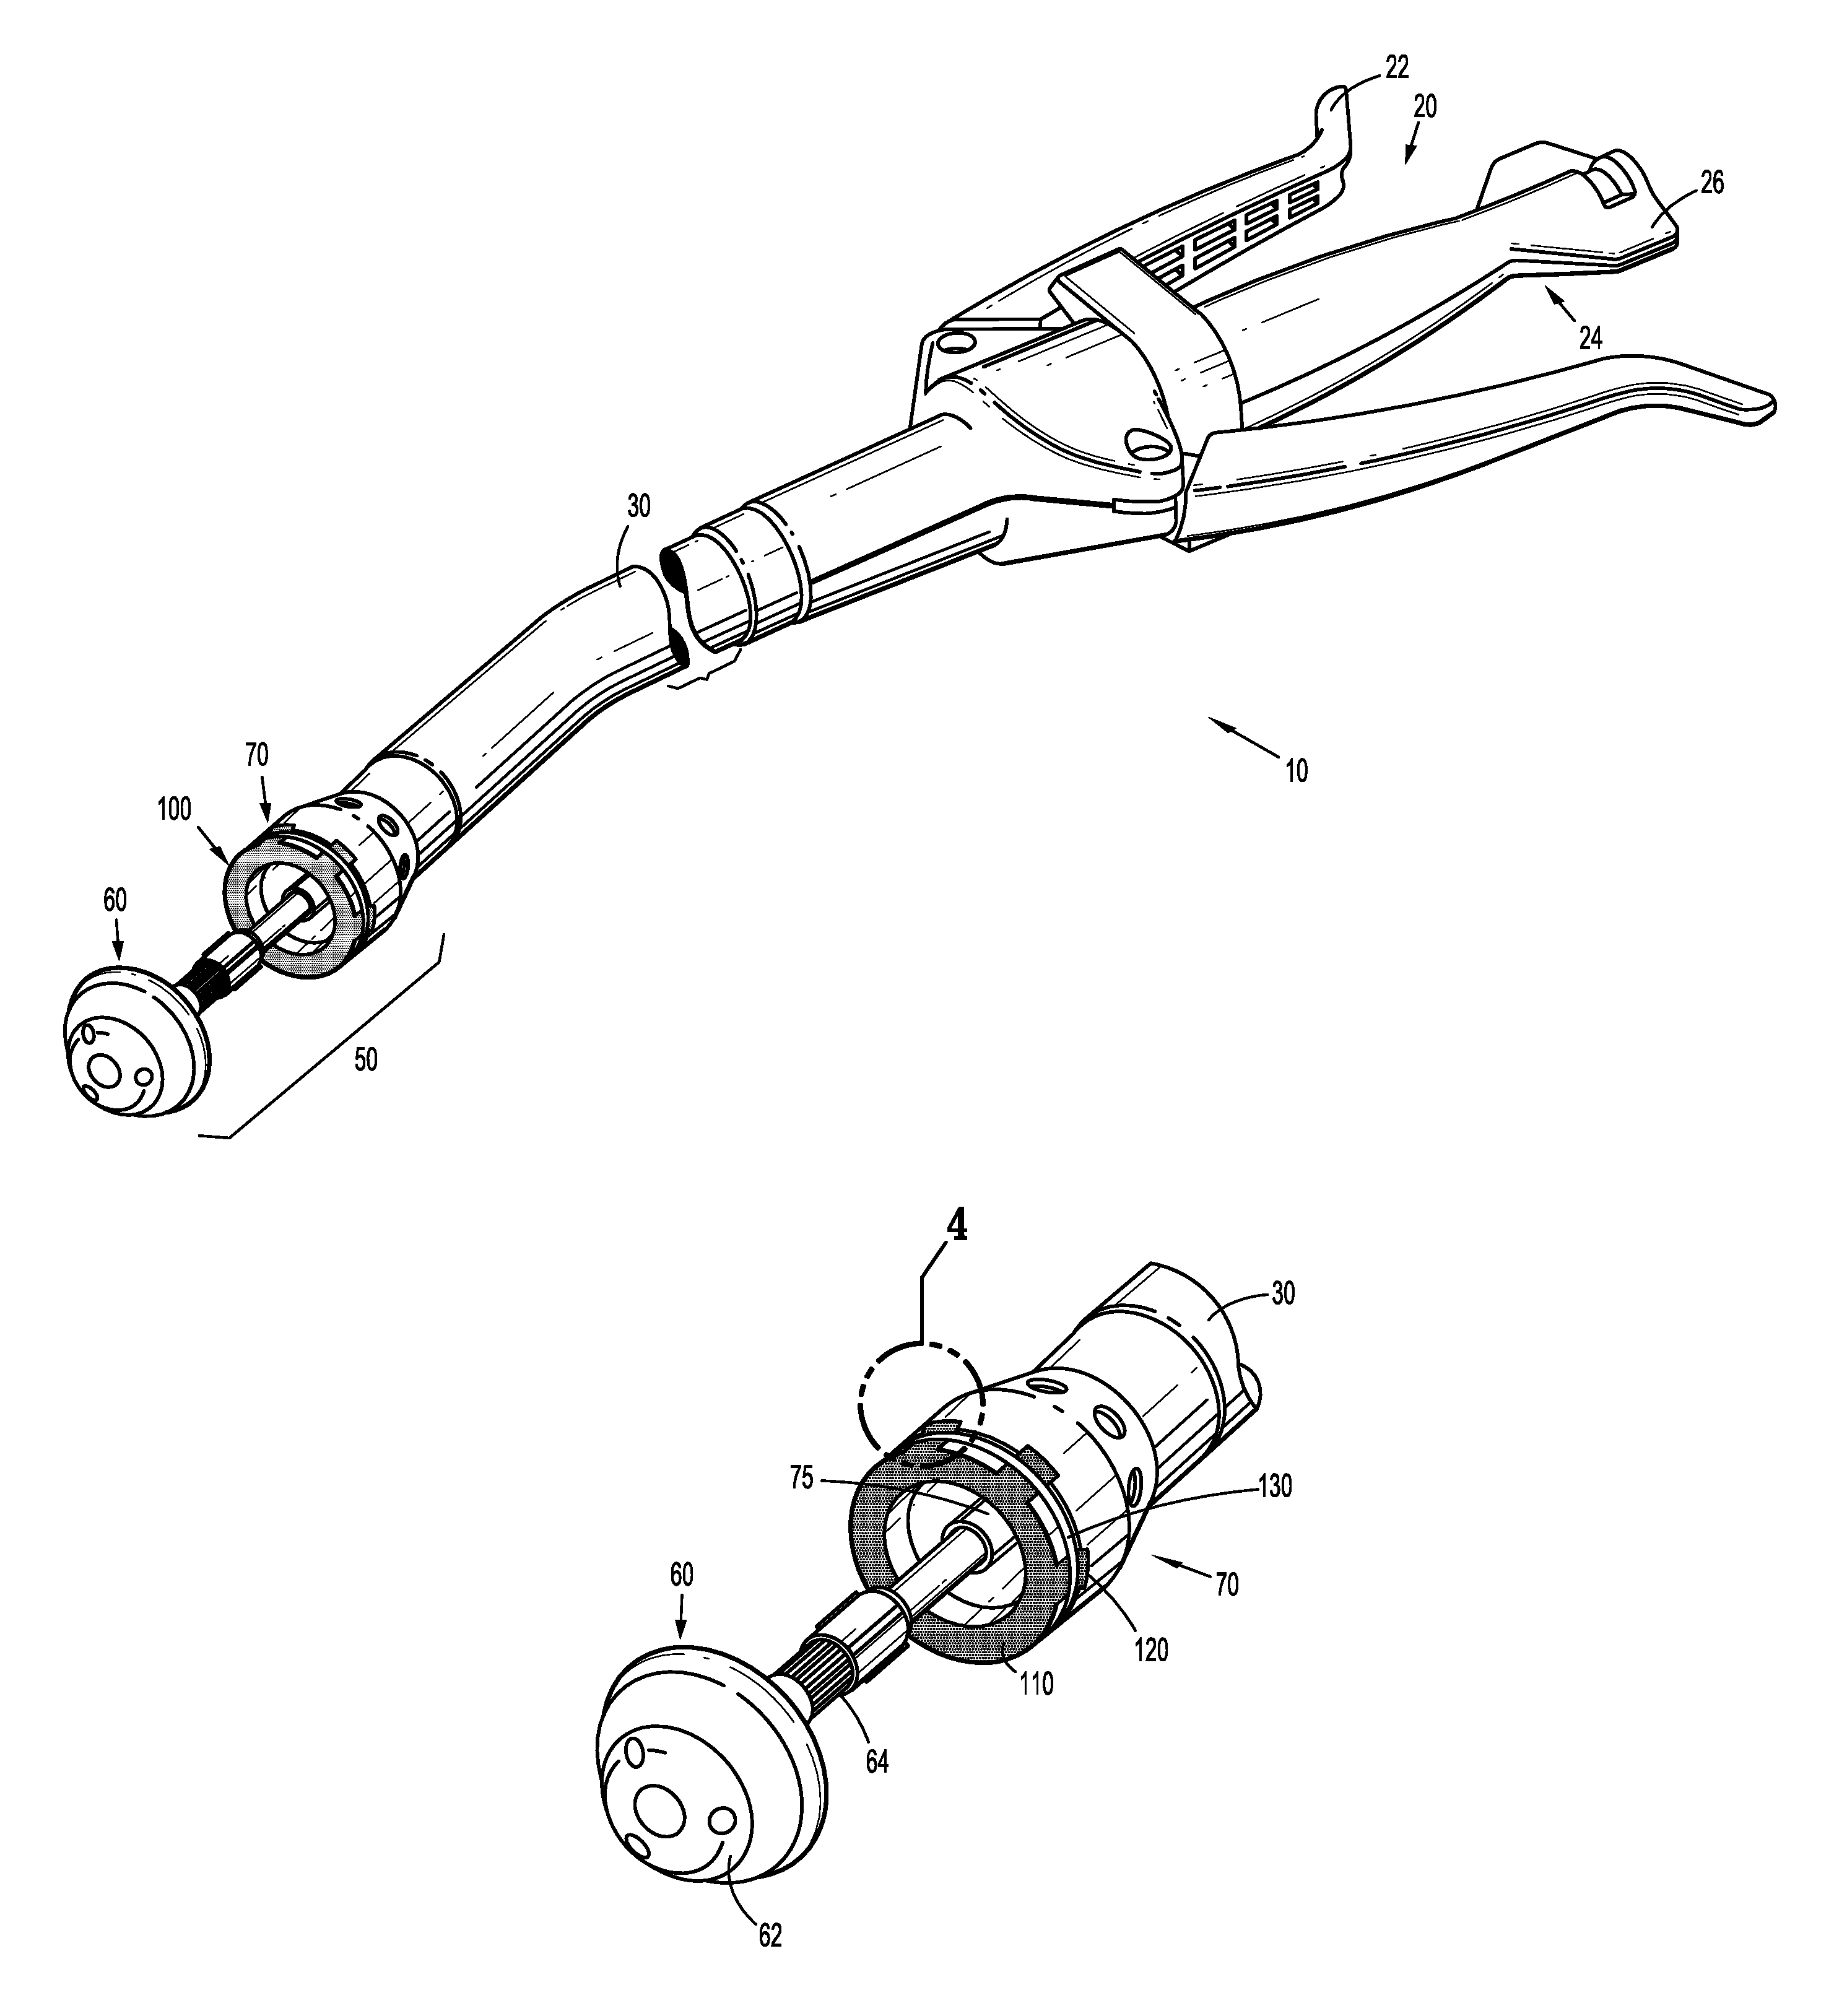 Surgical stapling apparatus including buttress attachment via tabs